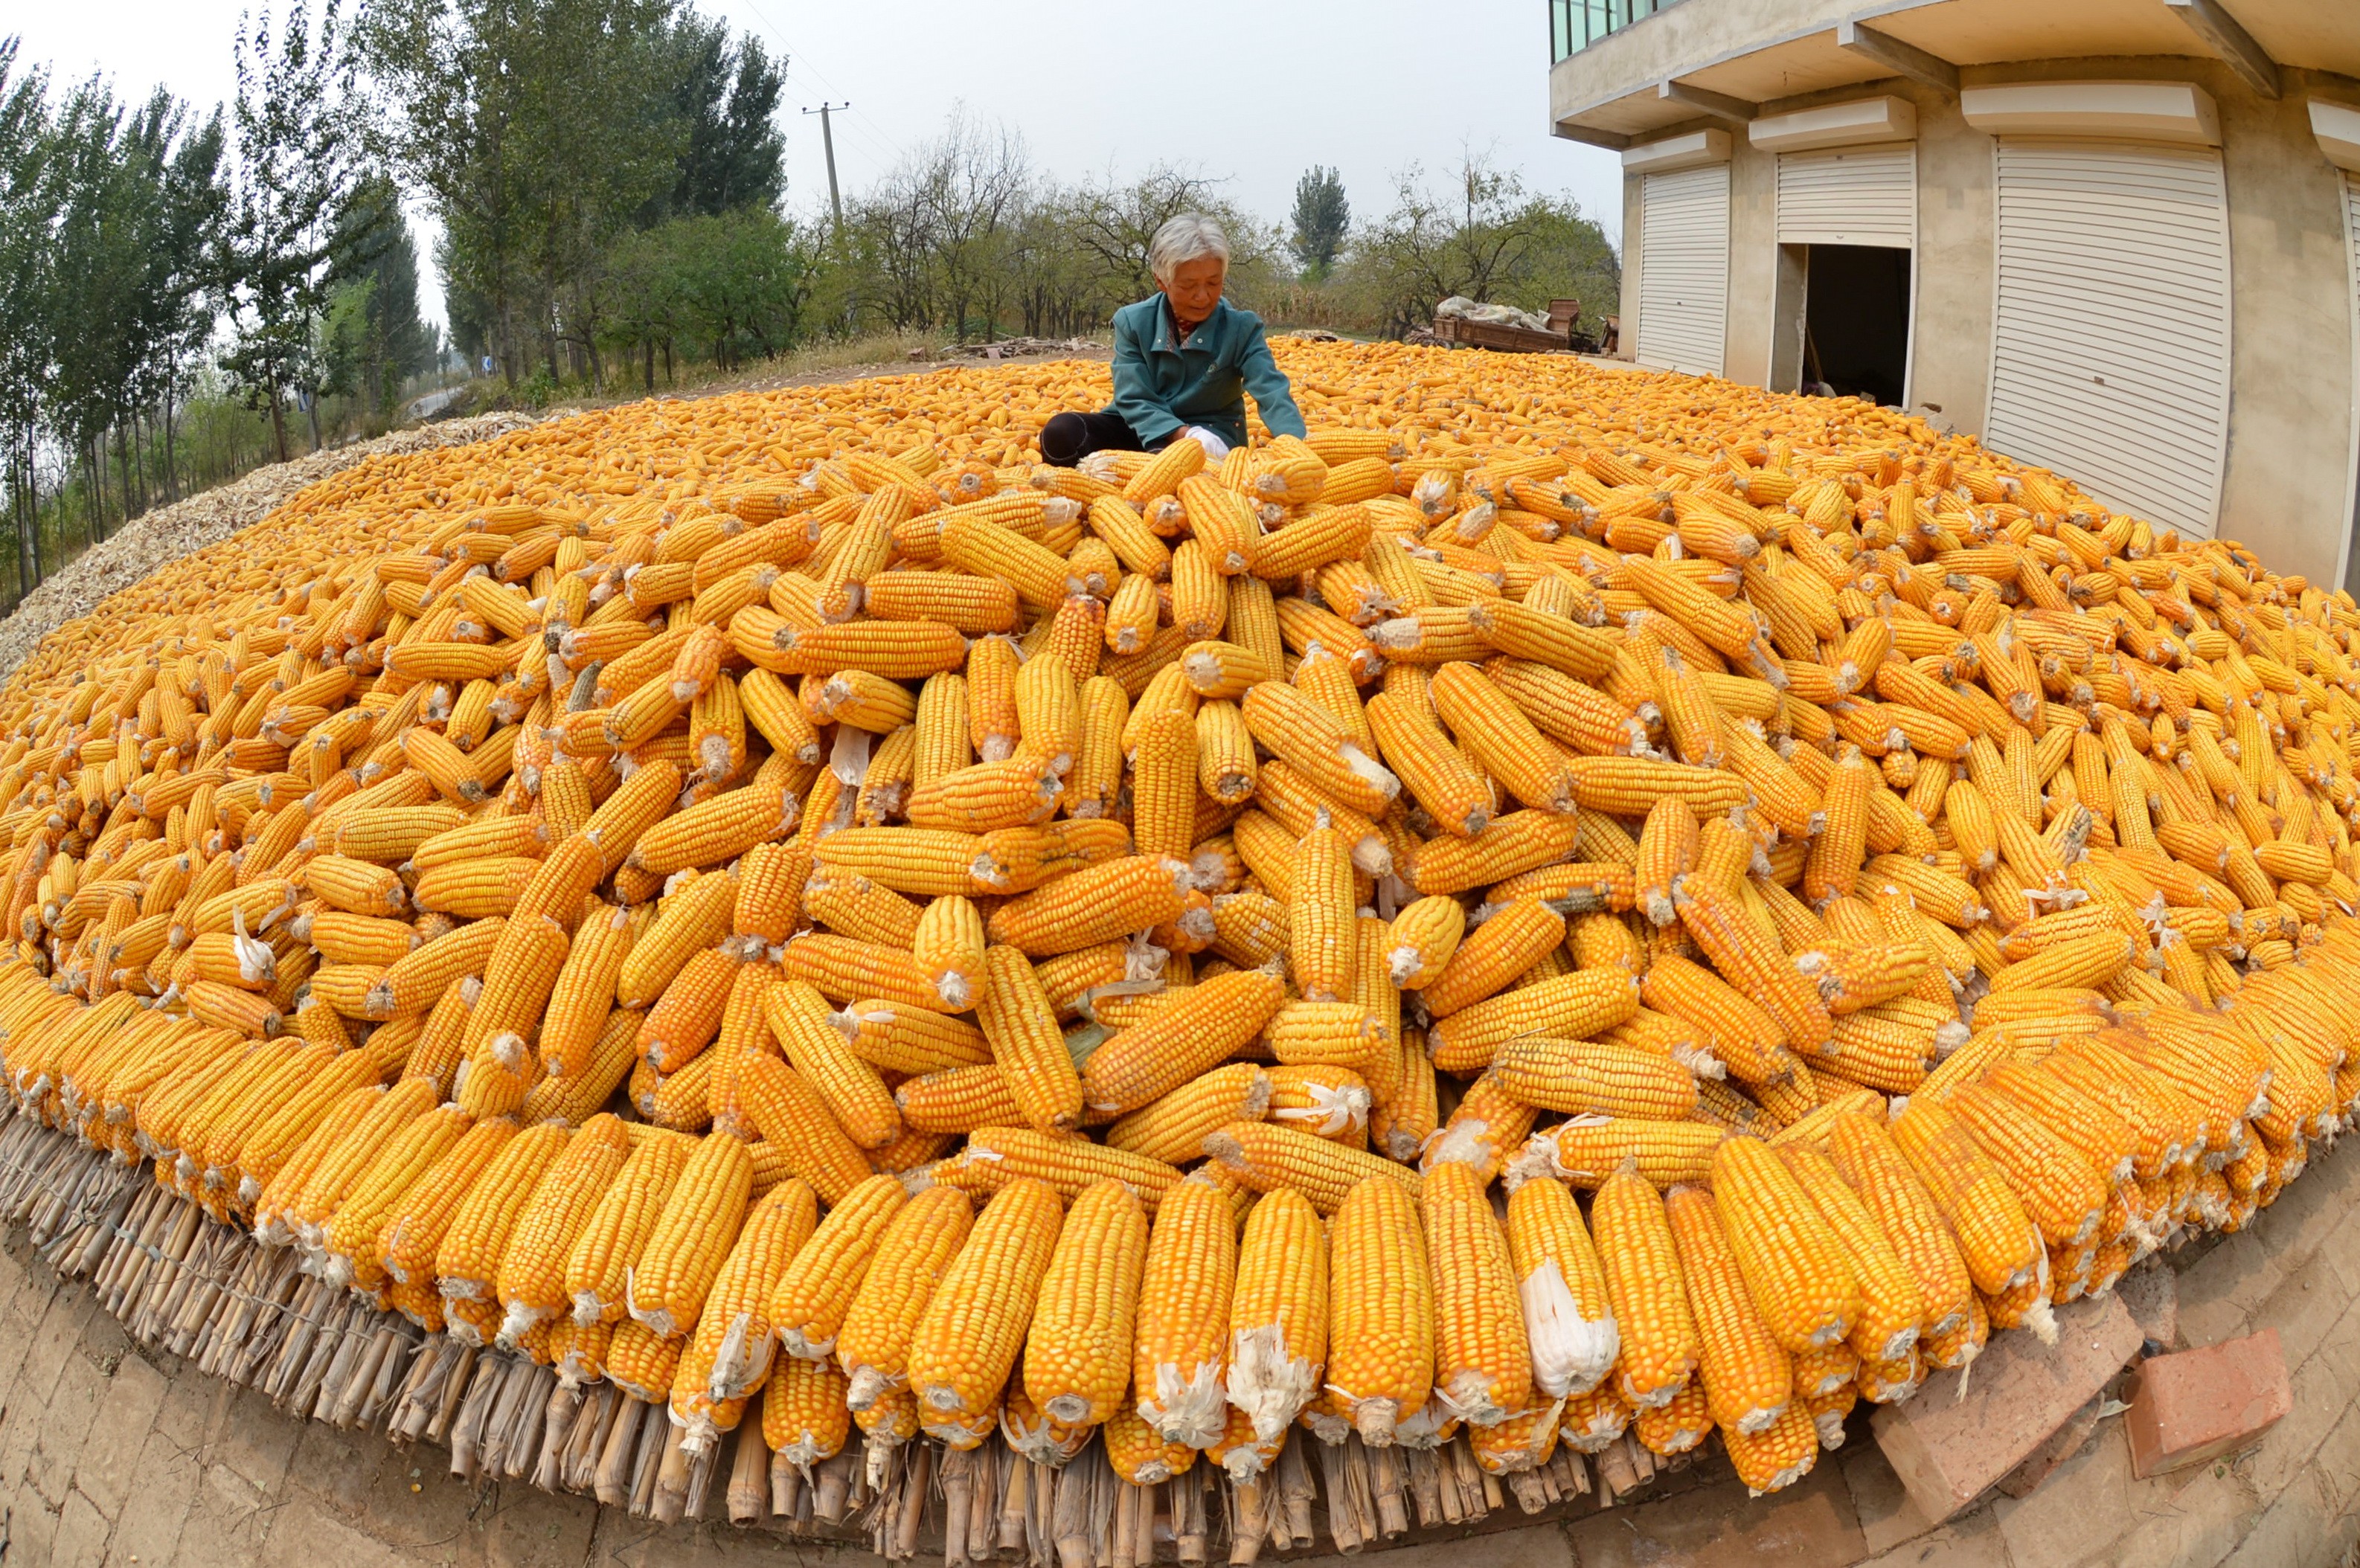 An elderly farmer dries maize in her courtyard in Botou, Hebei province, last October 12. Photo: Xinhua